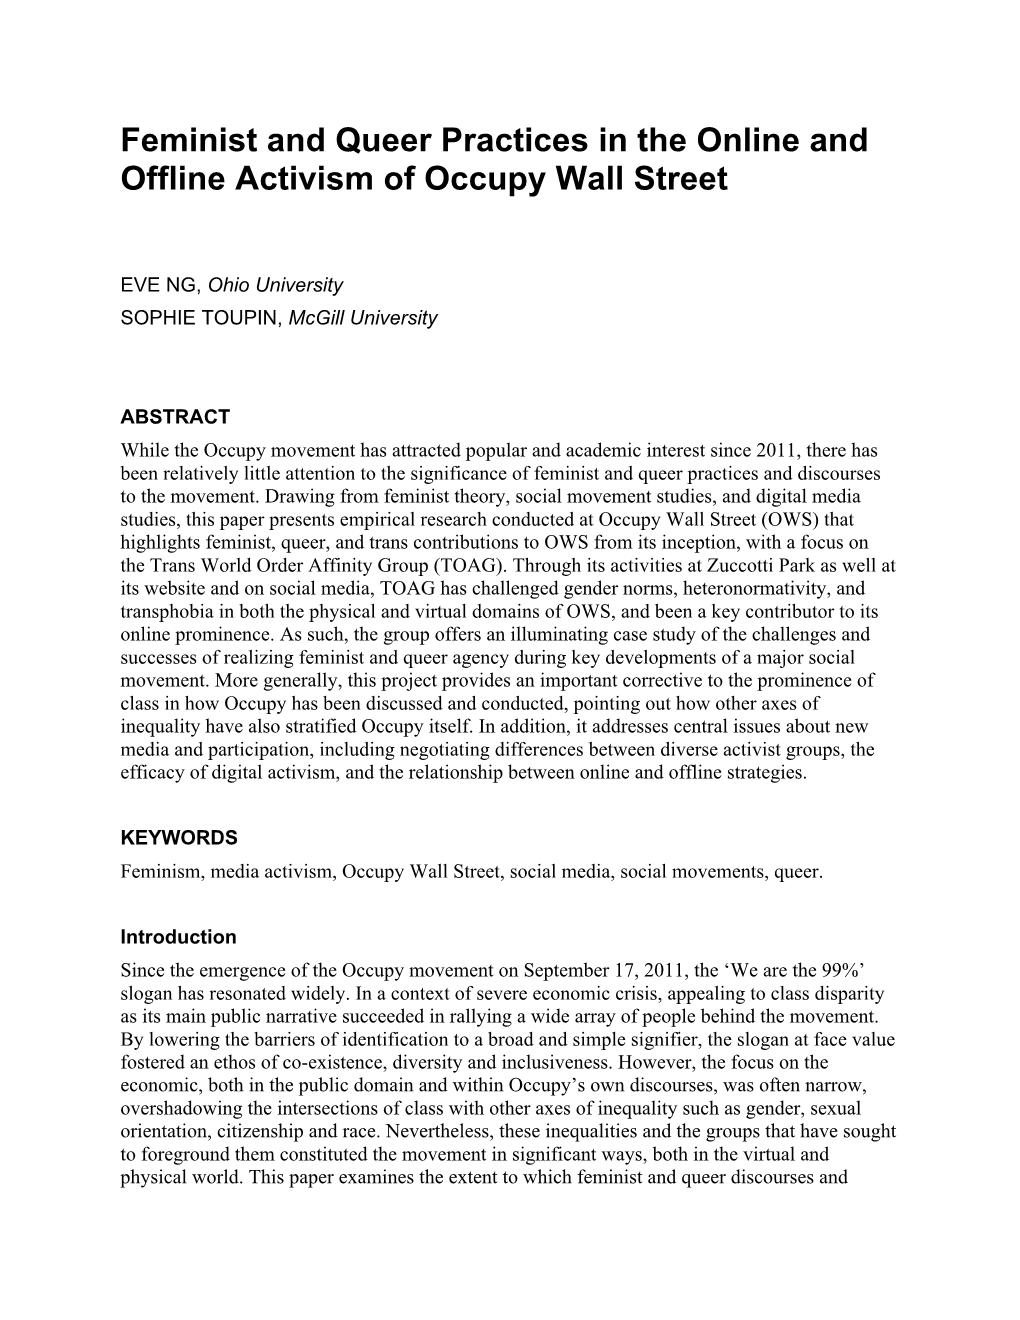 Feminist and Queer Practices in the Online and Offline Activism of Occupy Wall Street